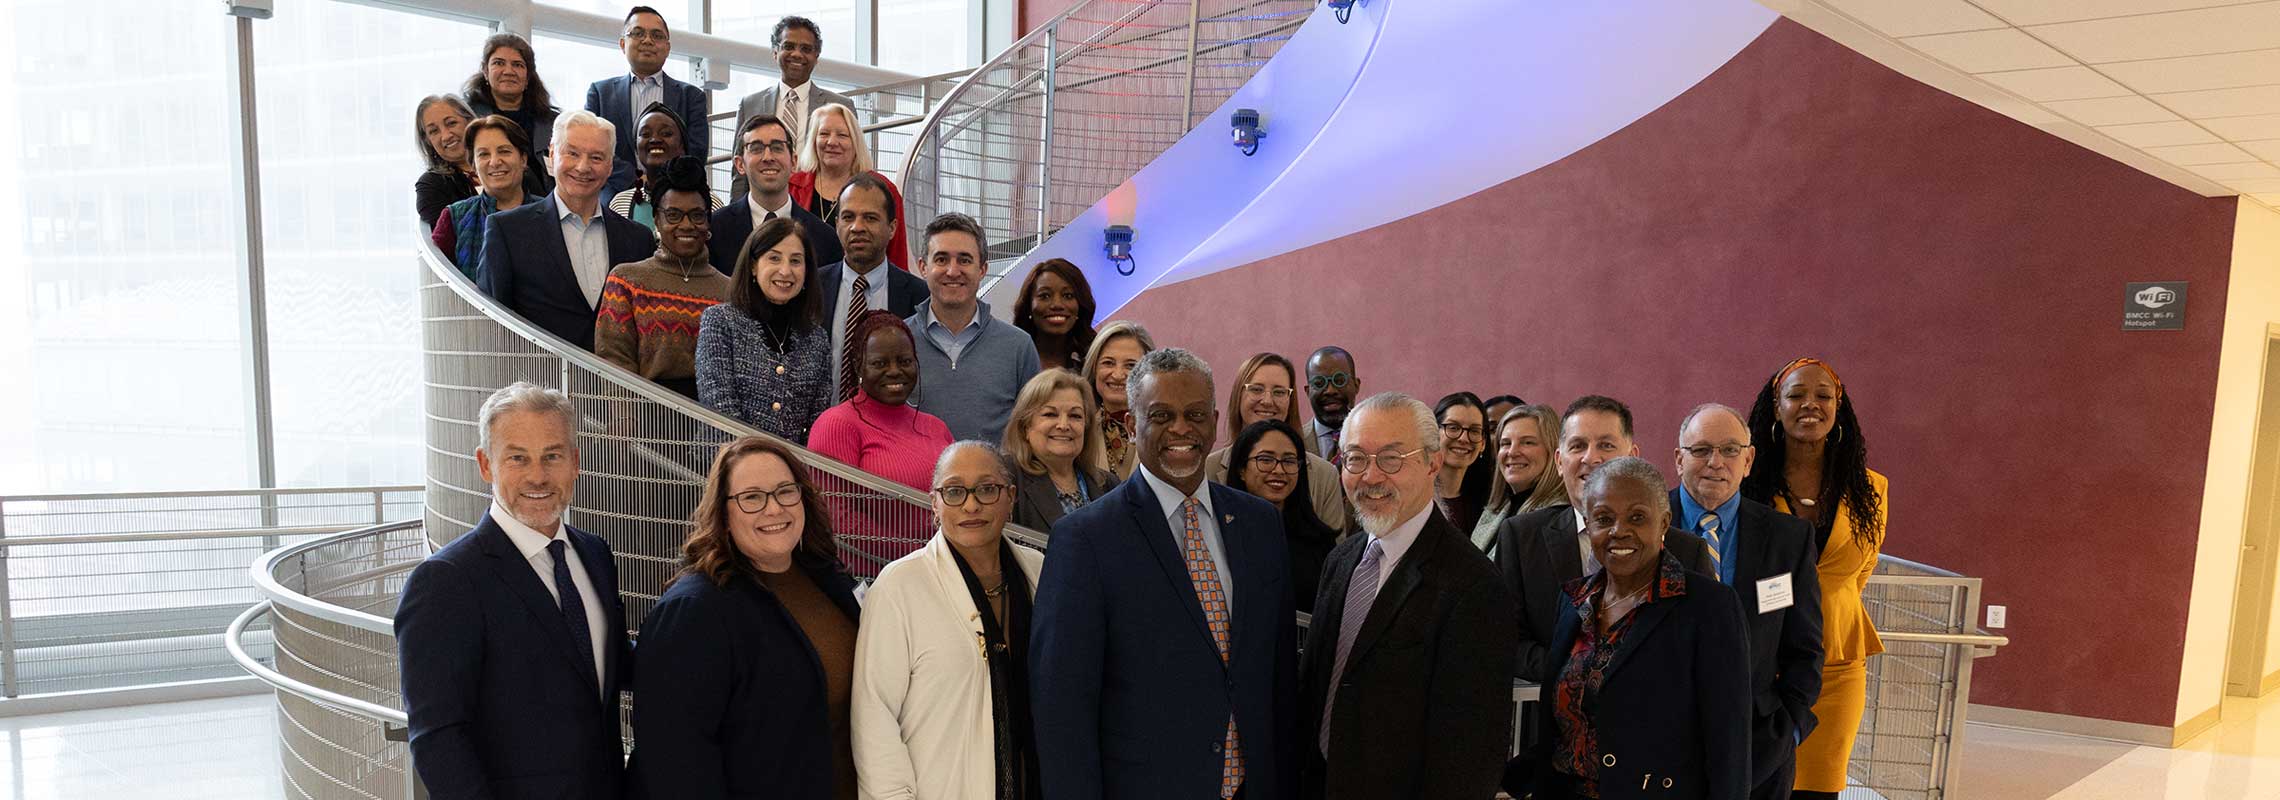 Leadership, staff and faculty from BMCC and CIEE met on January 24, 2024 to discuss a collaboration to expand Study Abroad at BMCC. L-R front row: James Pellow, CIEE; Sara Hart, CIEE; Karen Wilson-Stevenson, BMCC; Anthony E. Munroe, BMCC; Erwin Wong, BMCC; Marva Craig, BMCC.